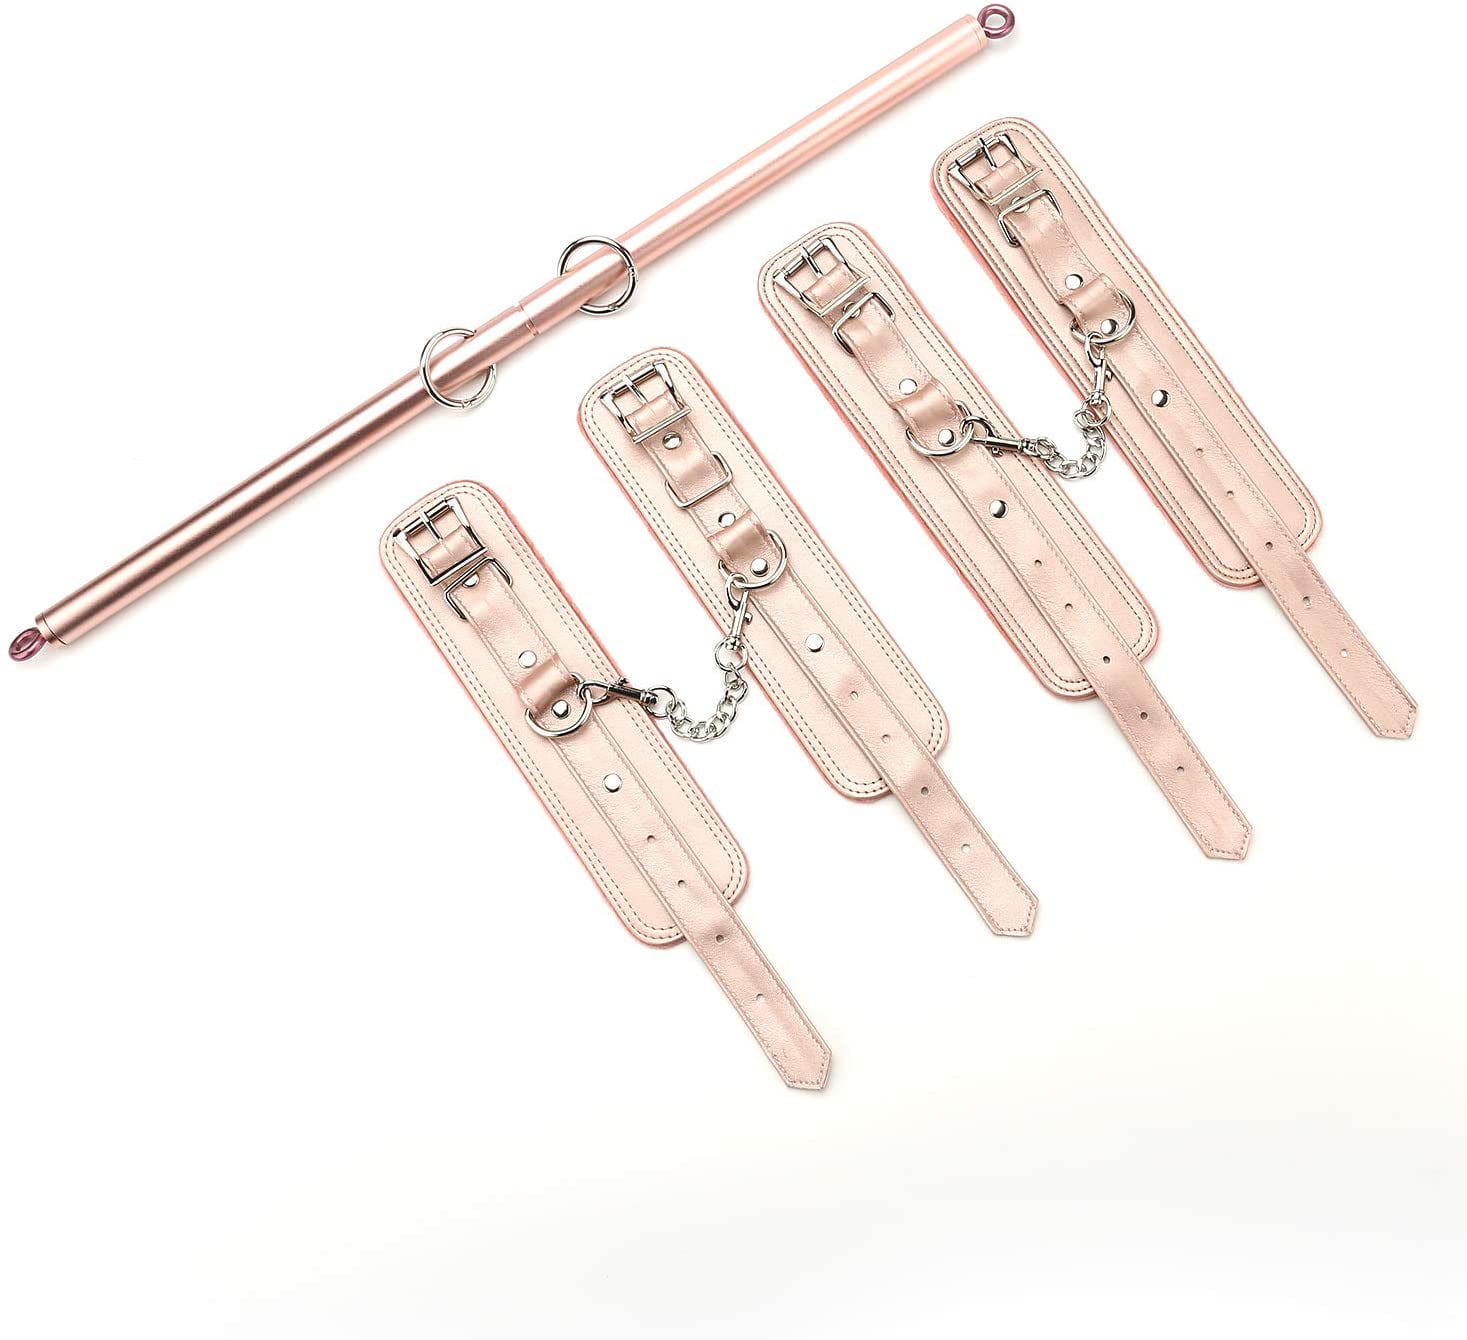 TMEOIIPY Rose Gold Stainless Steel Expandable Pilates Spreader Bar Set Sports Aid Training Fitness Gear with Fur Flocking Storage Bag 